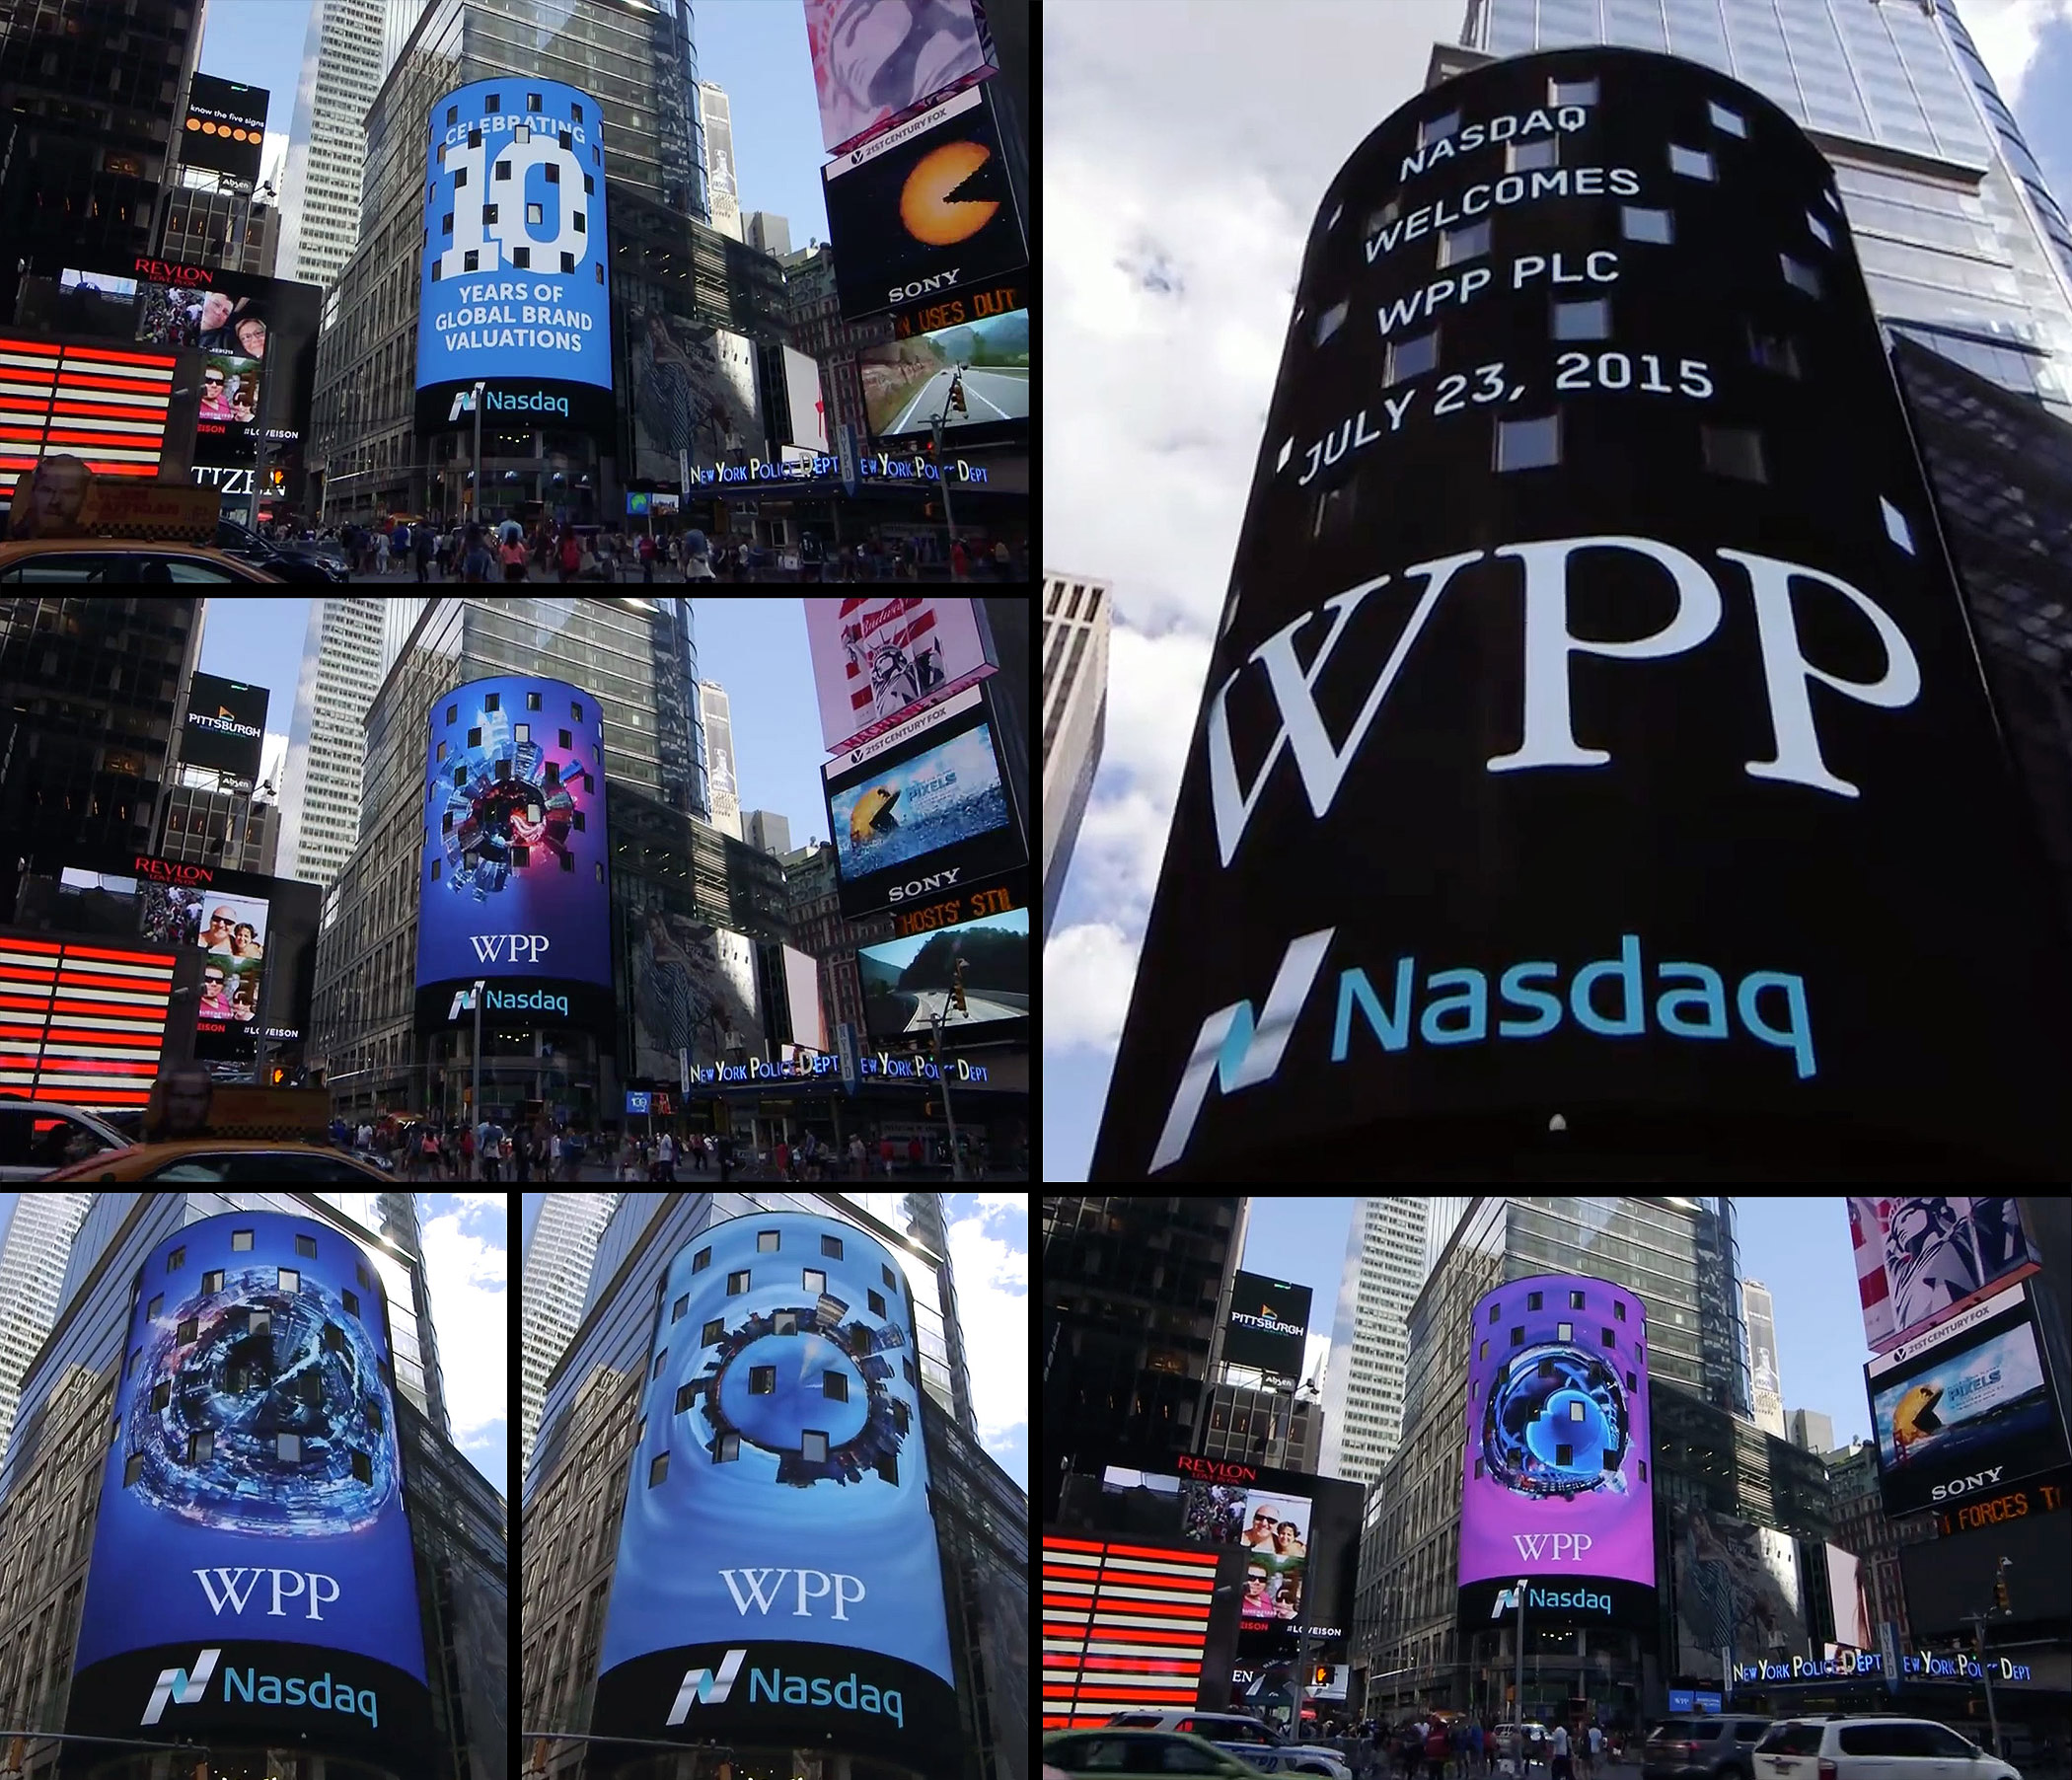 featured square image wpp nasdaq paul reiffer tiny planets low res brandz video wall display july 2015 marketsite tower times square new york